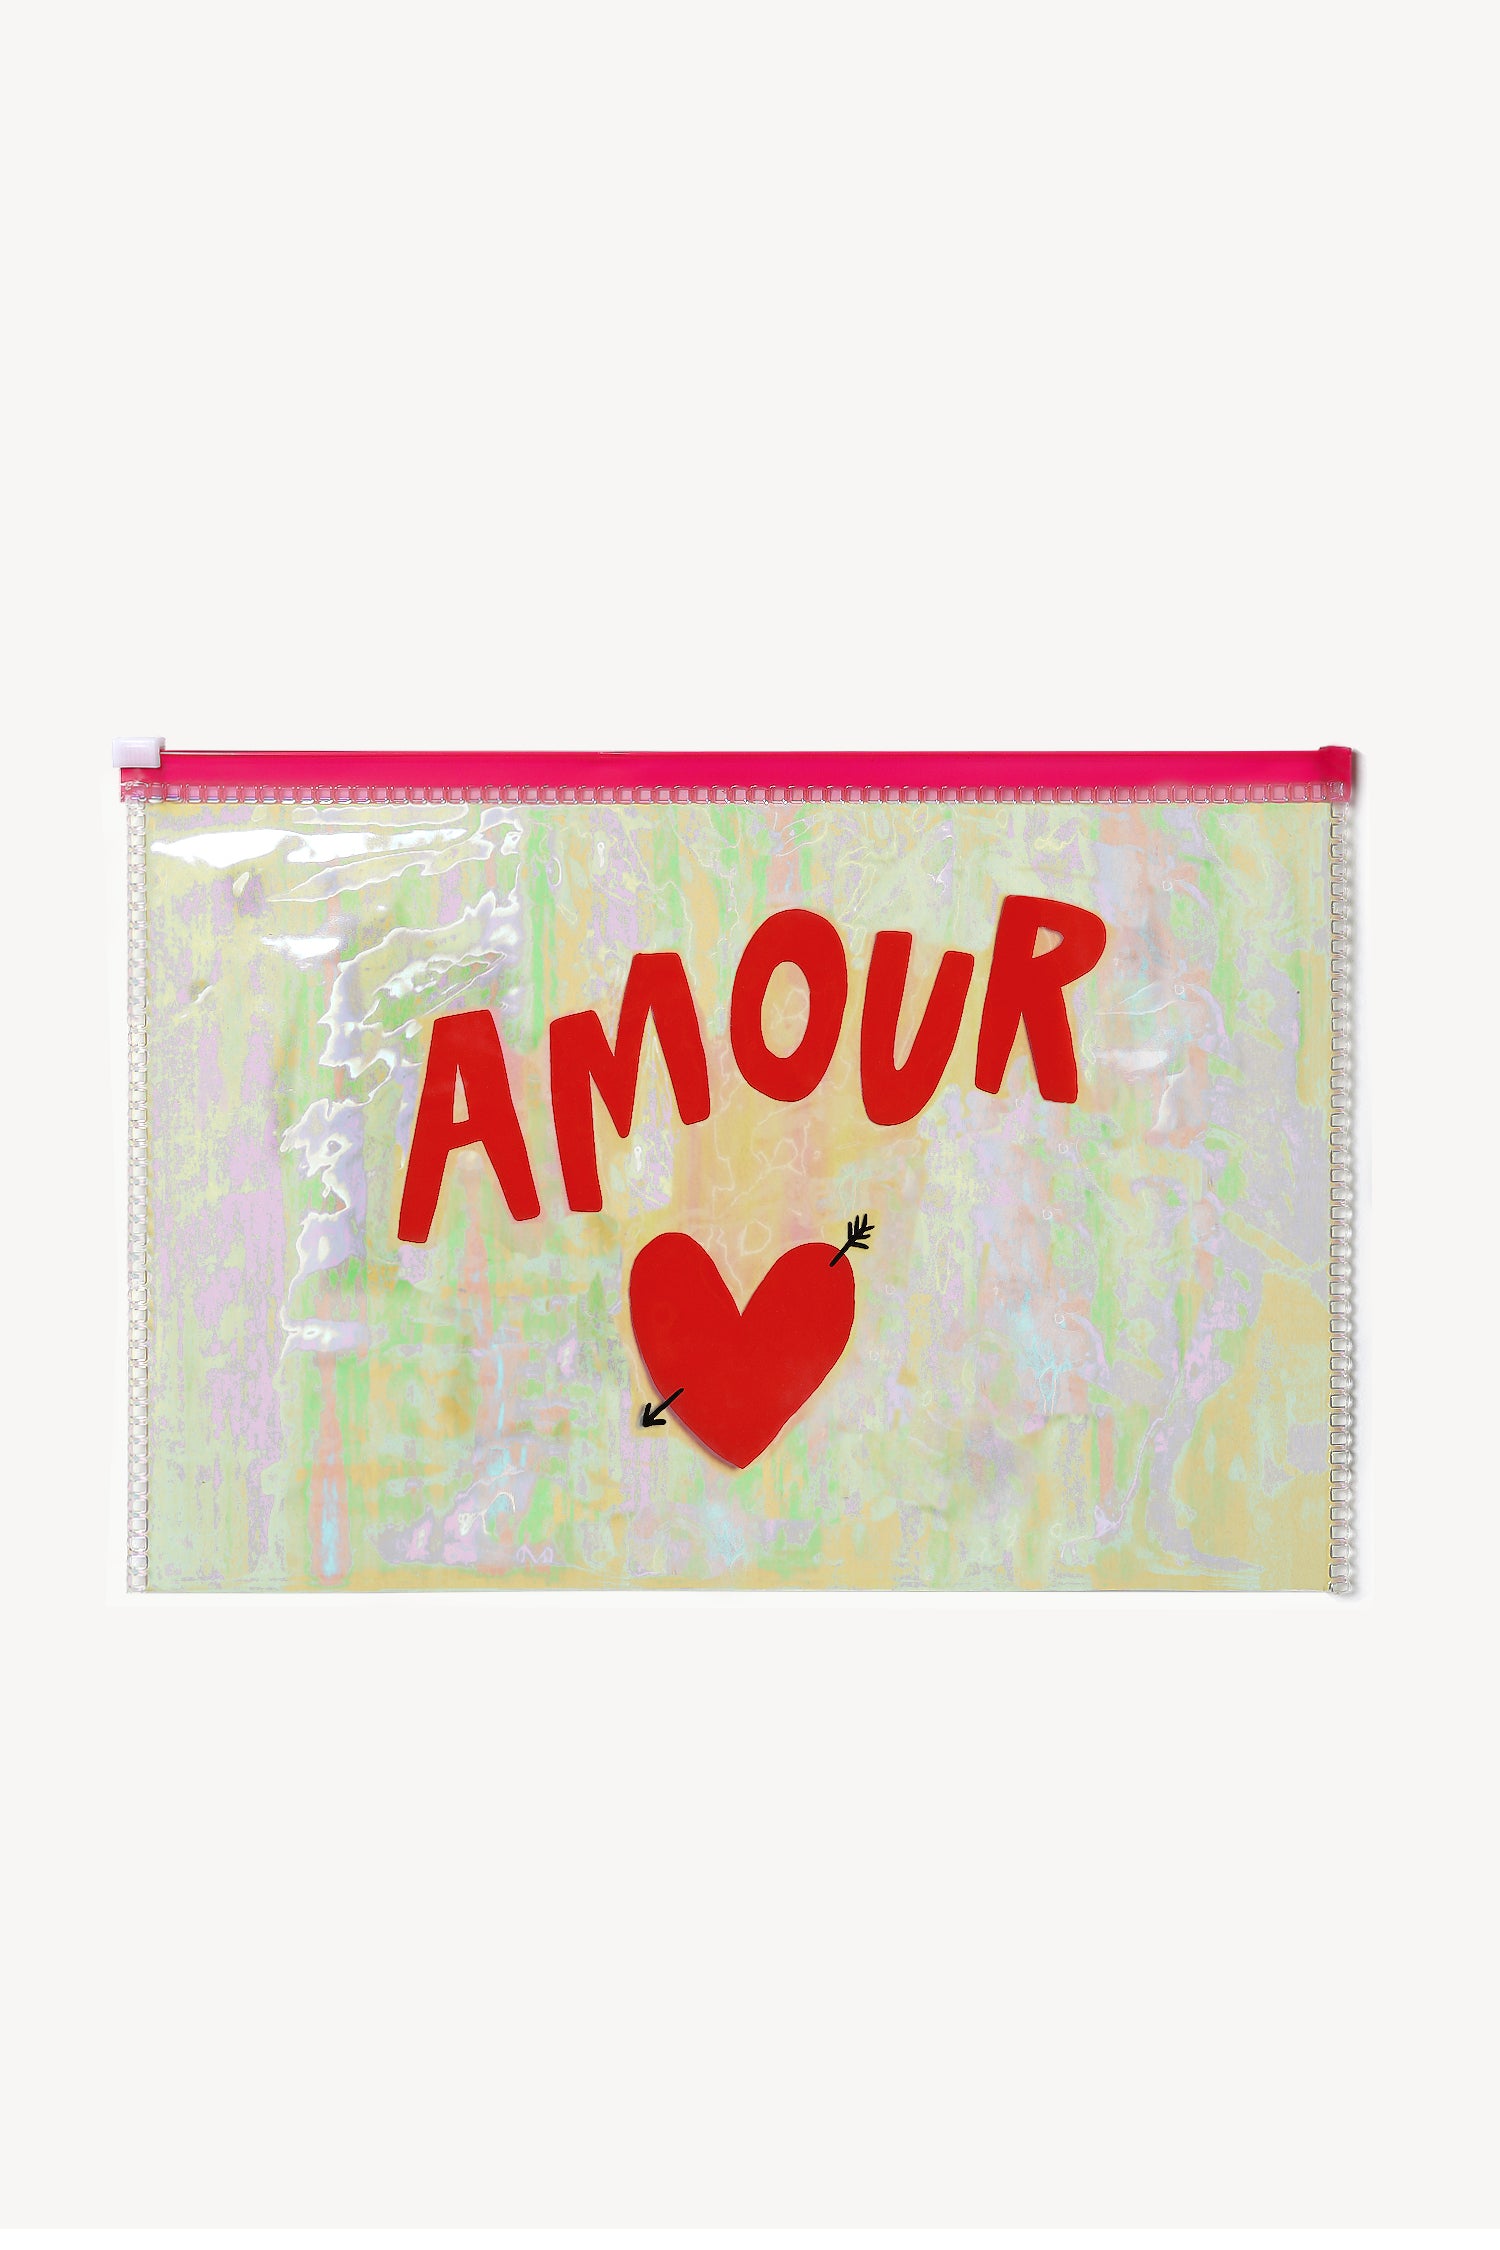 Pool Pouch 'Amour' in IridescentAnita Hass - Anita Hass